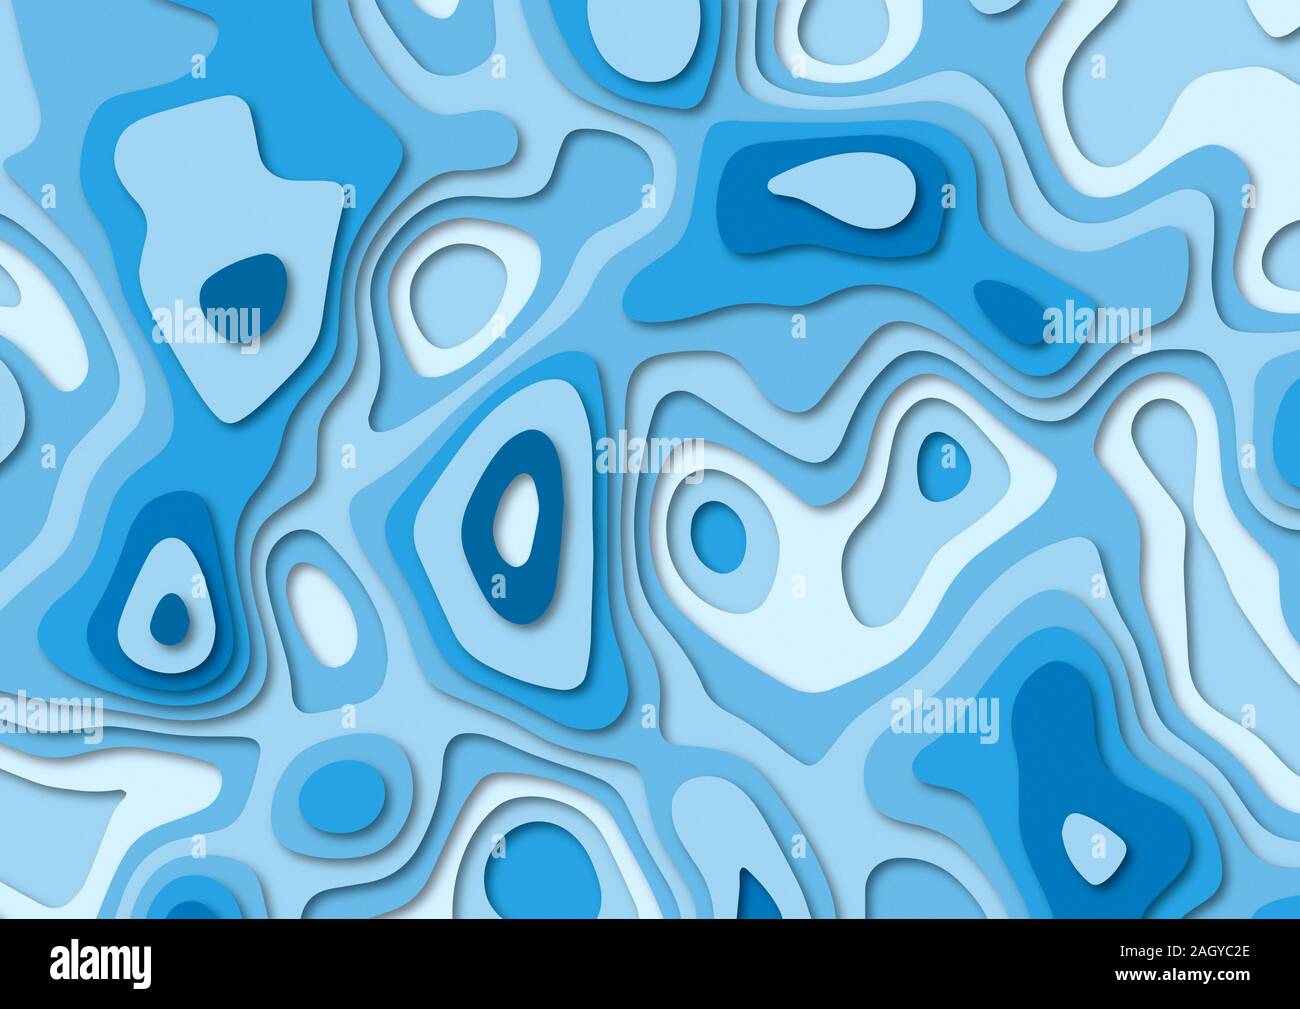 Blue 3d paper cut background, abstract realistic paper texture with wavy layers Stock Photo